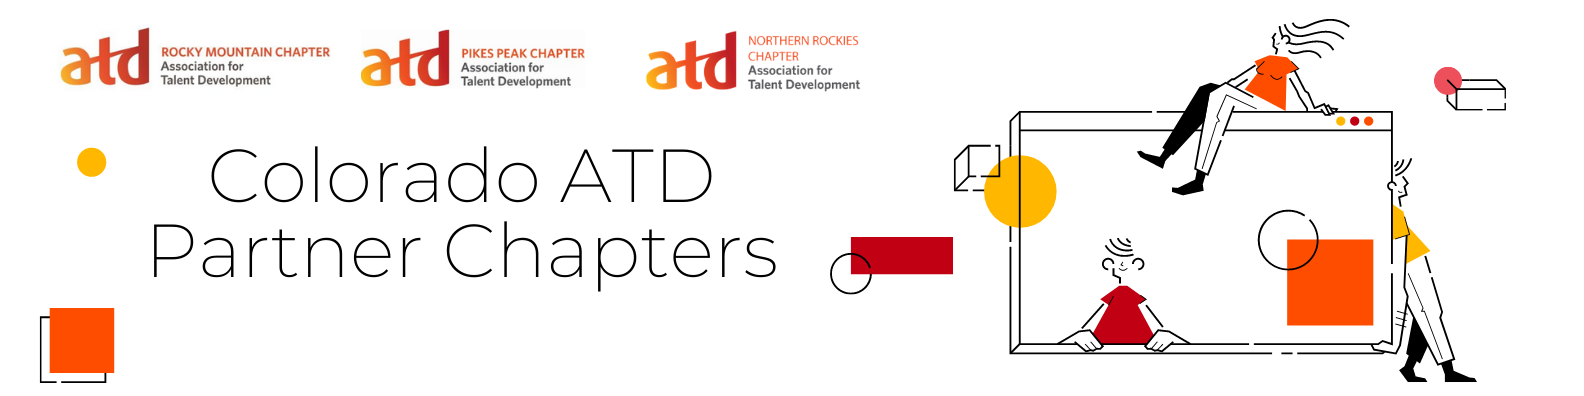 Colorado ATD Partner Chapters image